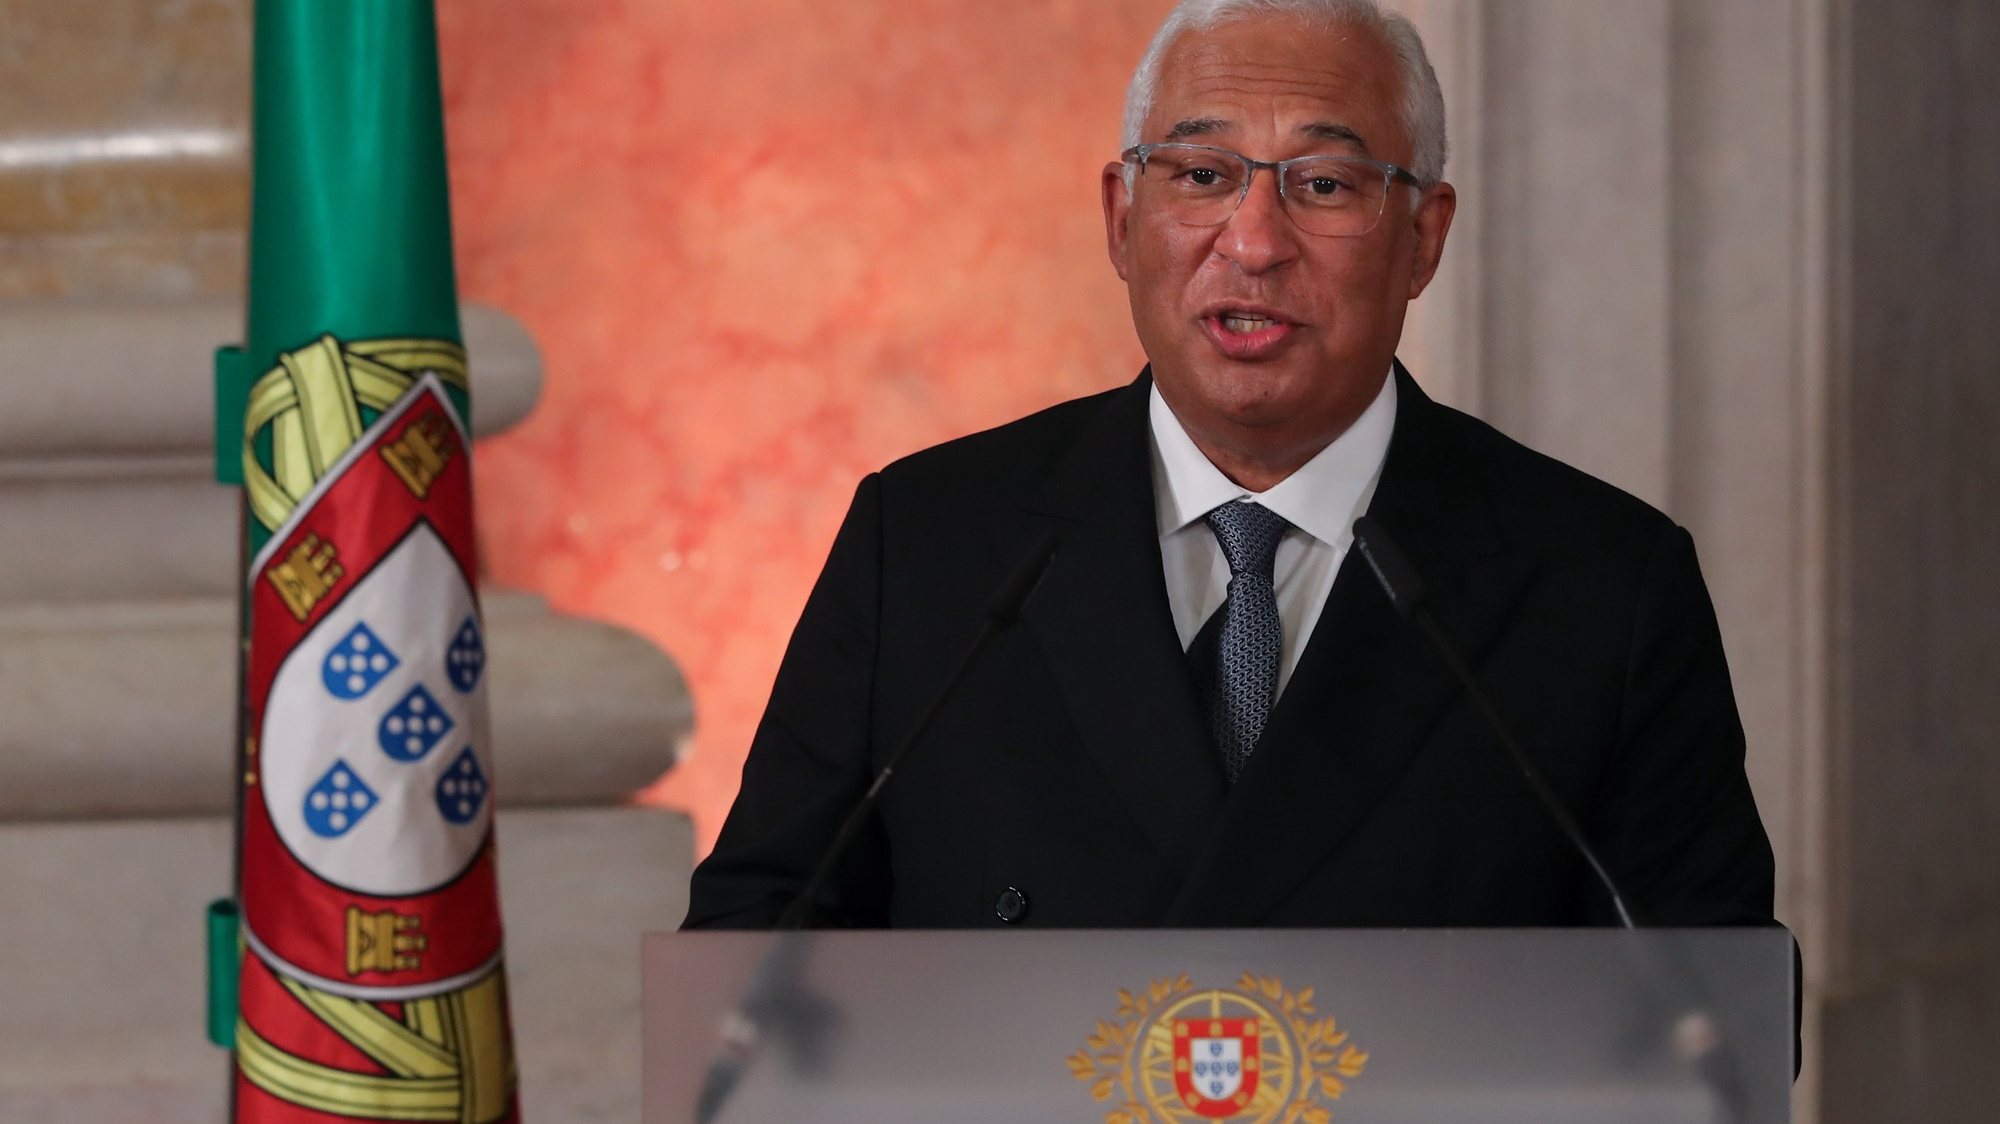 The secretary-general of Portuguese Socialist Party and the Prime-Minister, Antonio Costa, delivers a speech during the swearing in cerimony of the XXIII Constititional Government held at Ajuda Palace, Lisbon, Portugal, 30th March 2022. This is the third government headed by Antonio Costa, after winning the January 30 legislative elections with an absolute majority. MIGUEL A. LOPES/LUSA